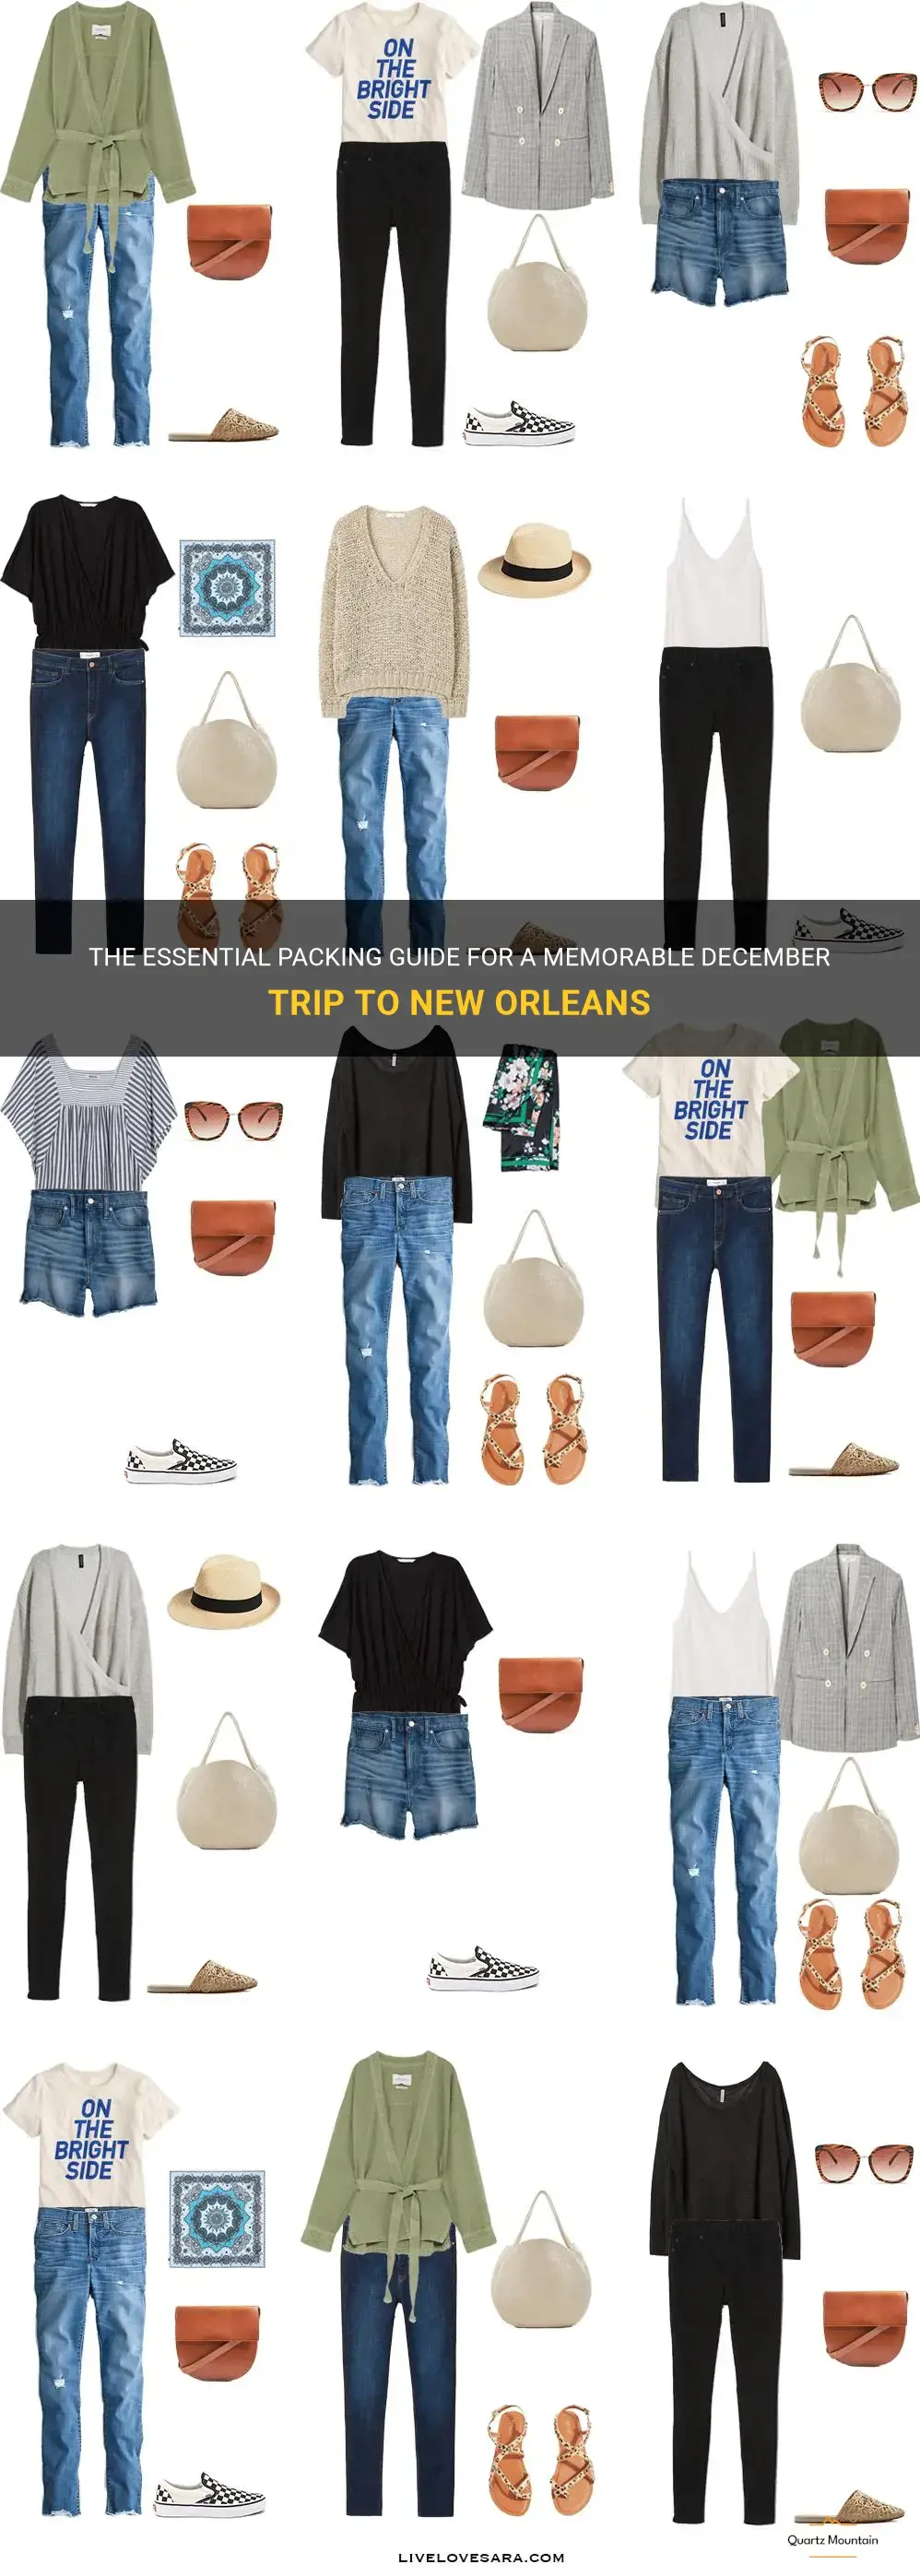 what to pack for a new orleans trip in december